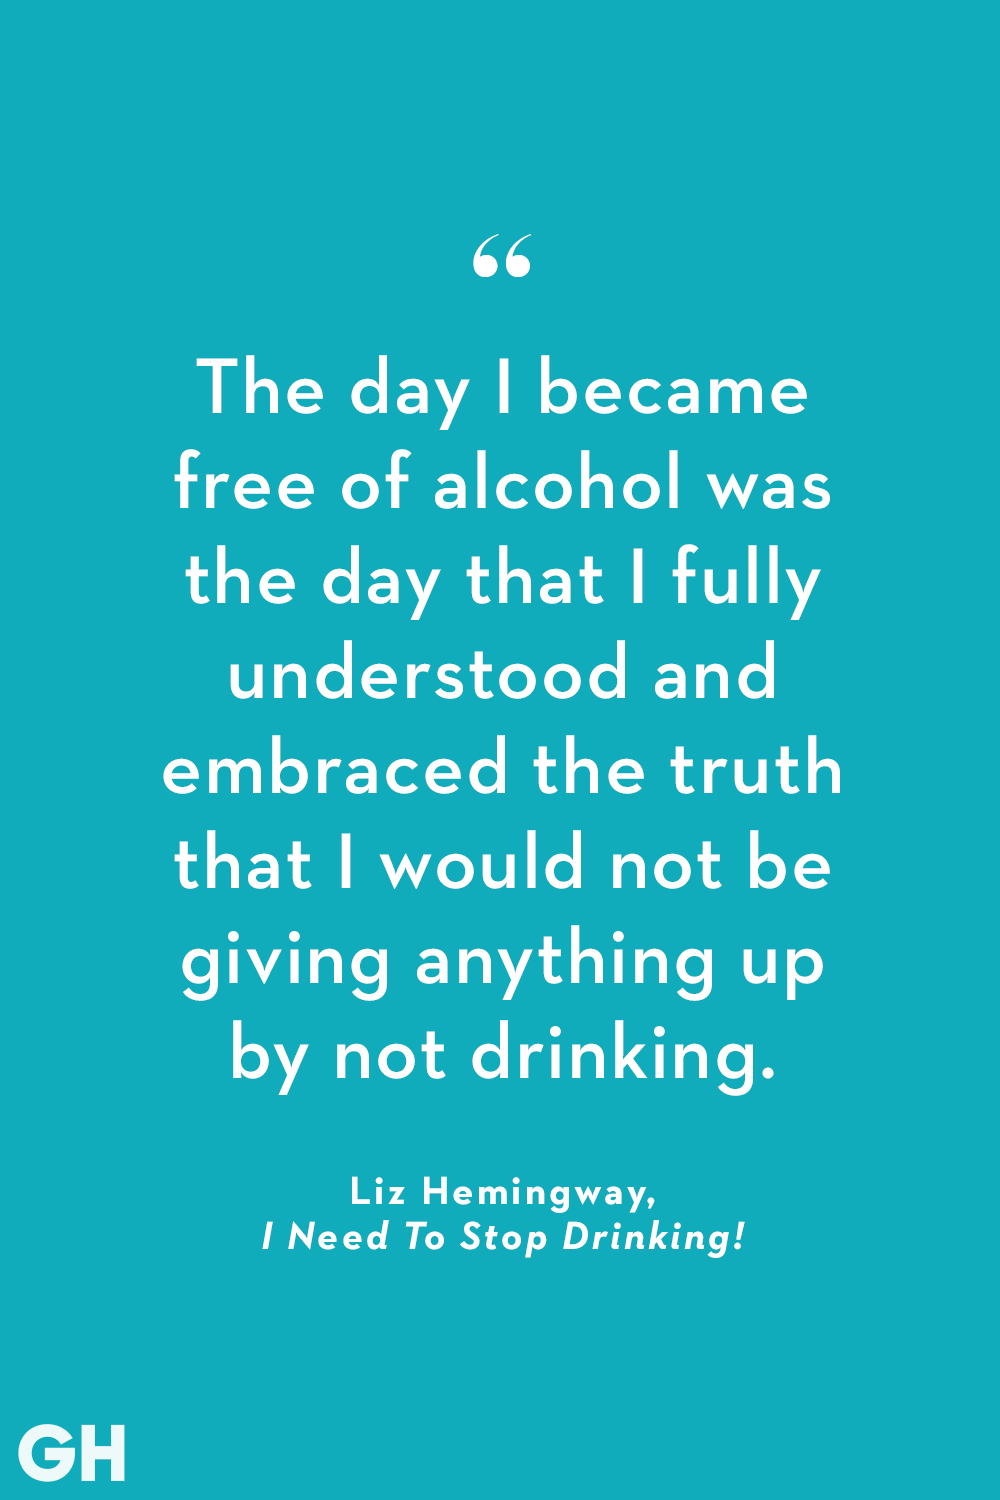 Alcohol Quotes - Best Quotes About Alcohol for Inspiration and